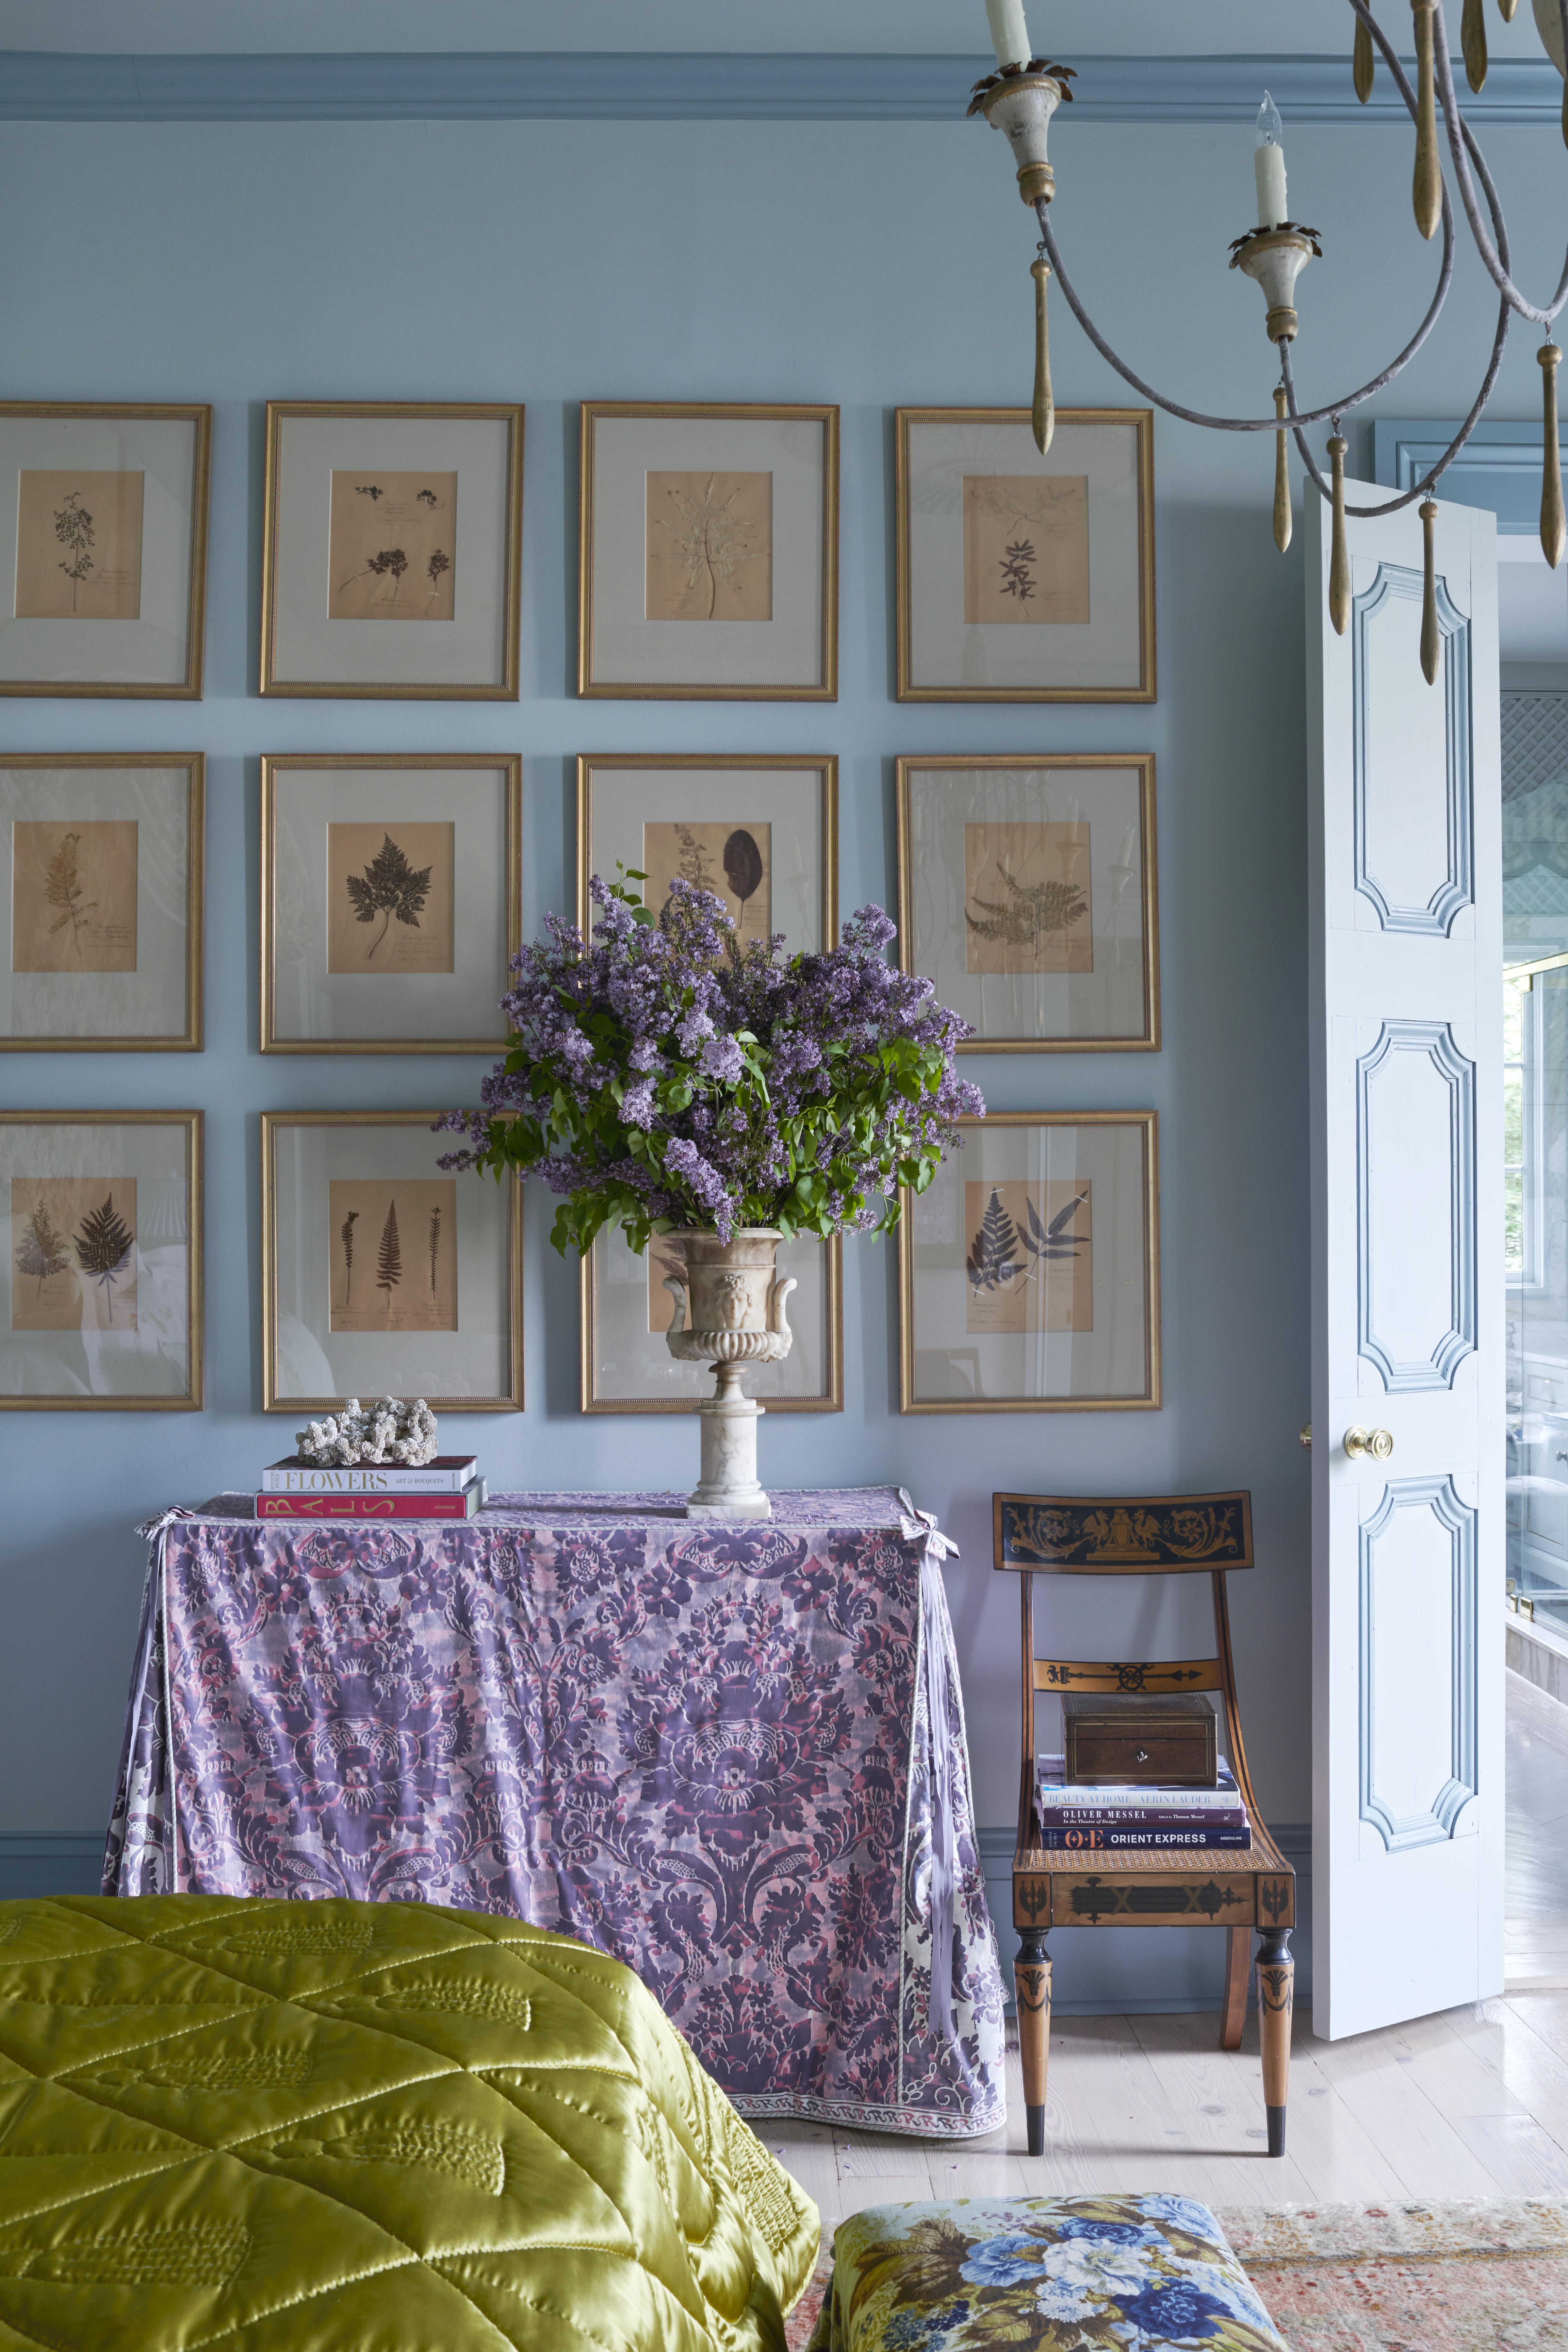 10 Purples You Should Decorate With!